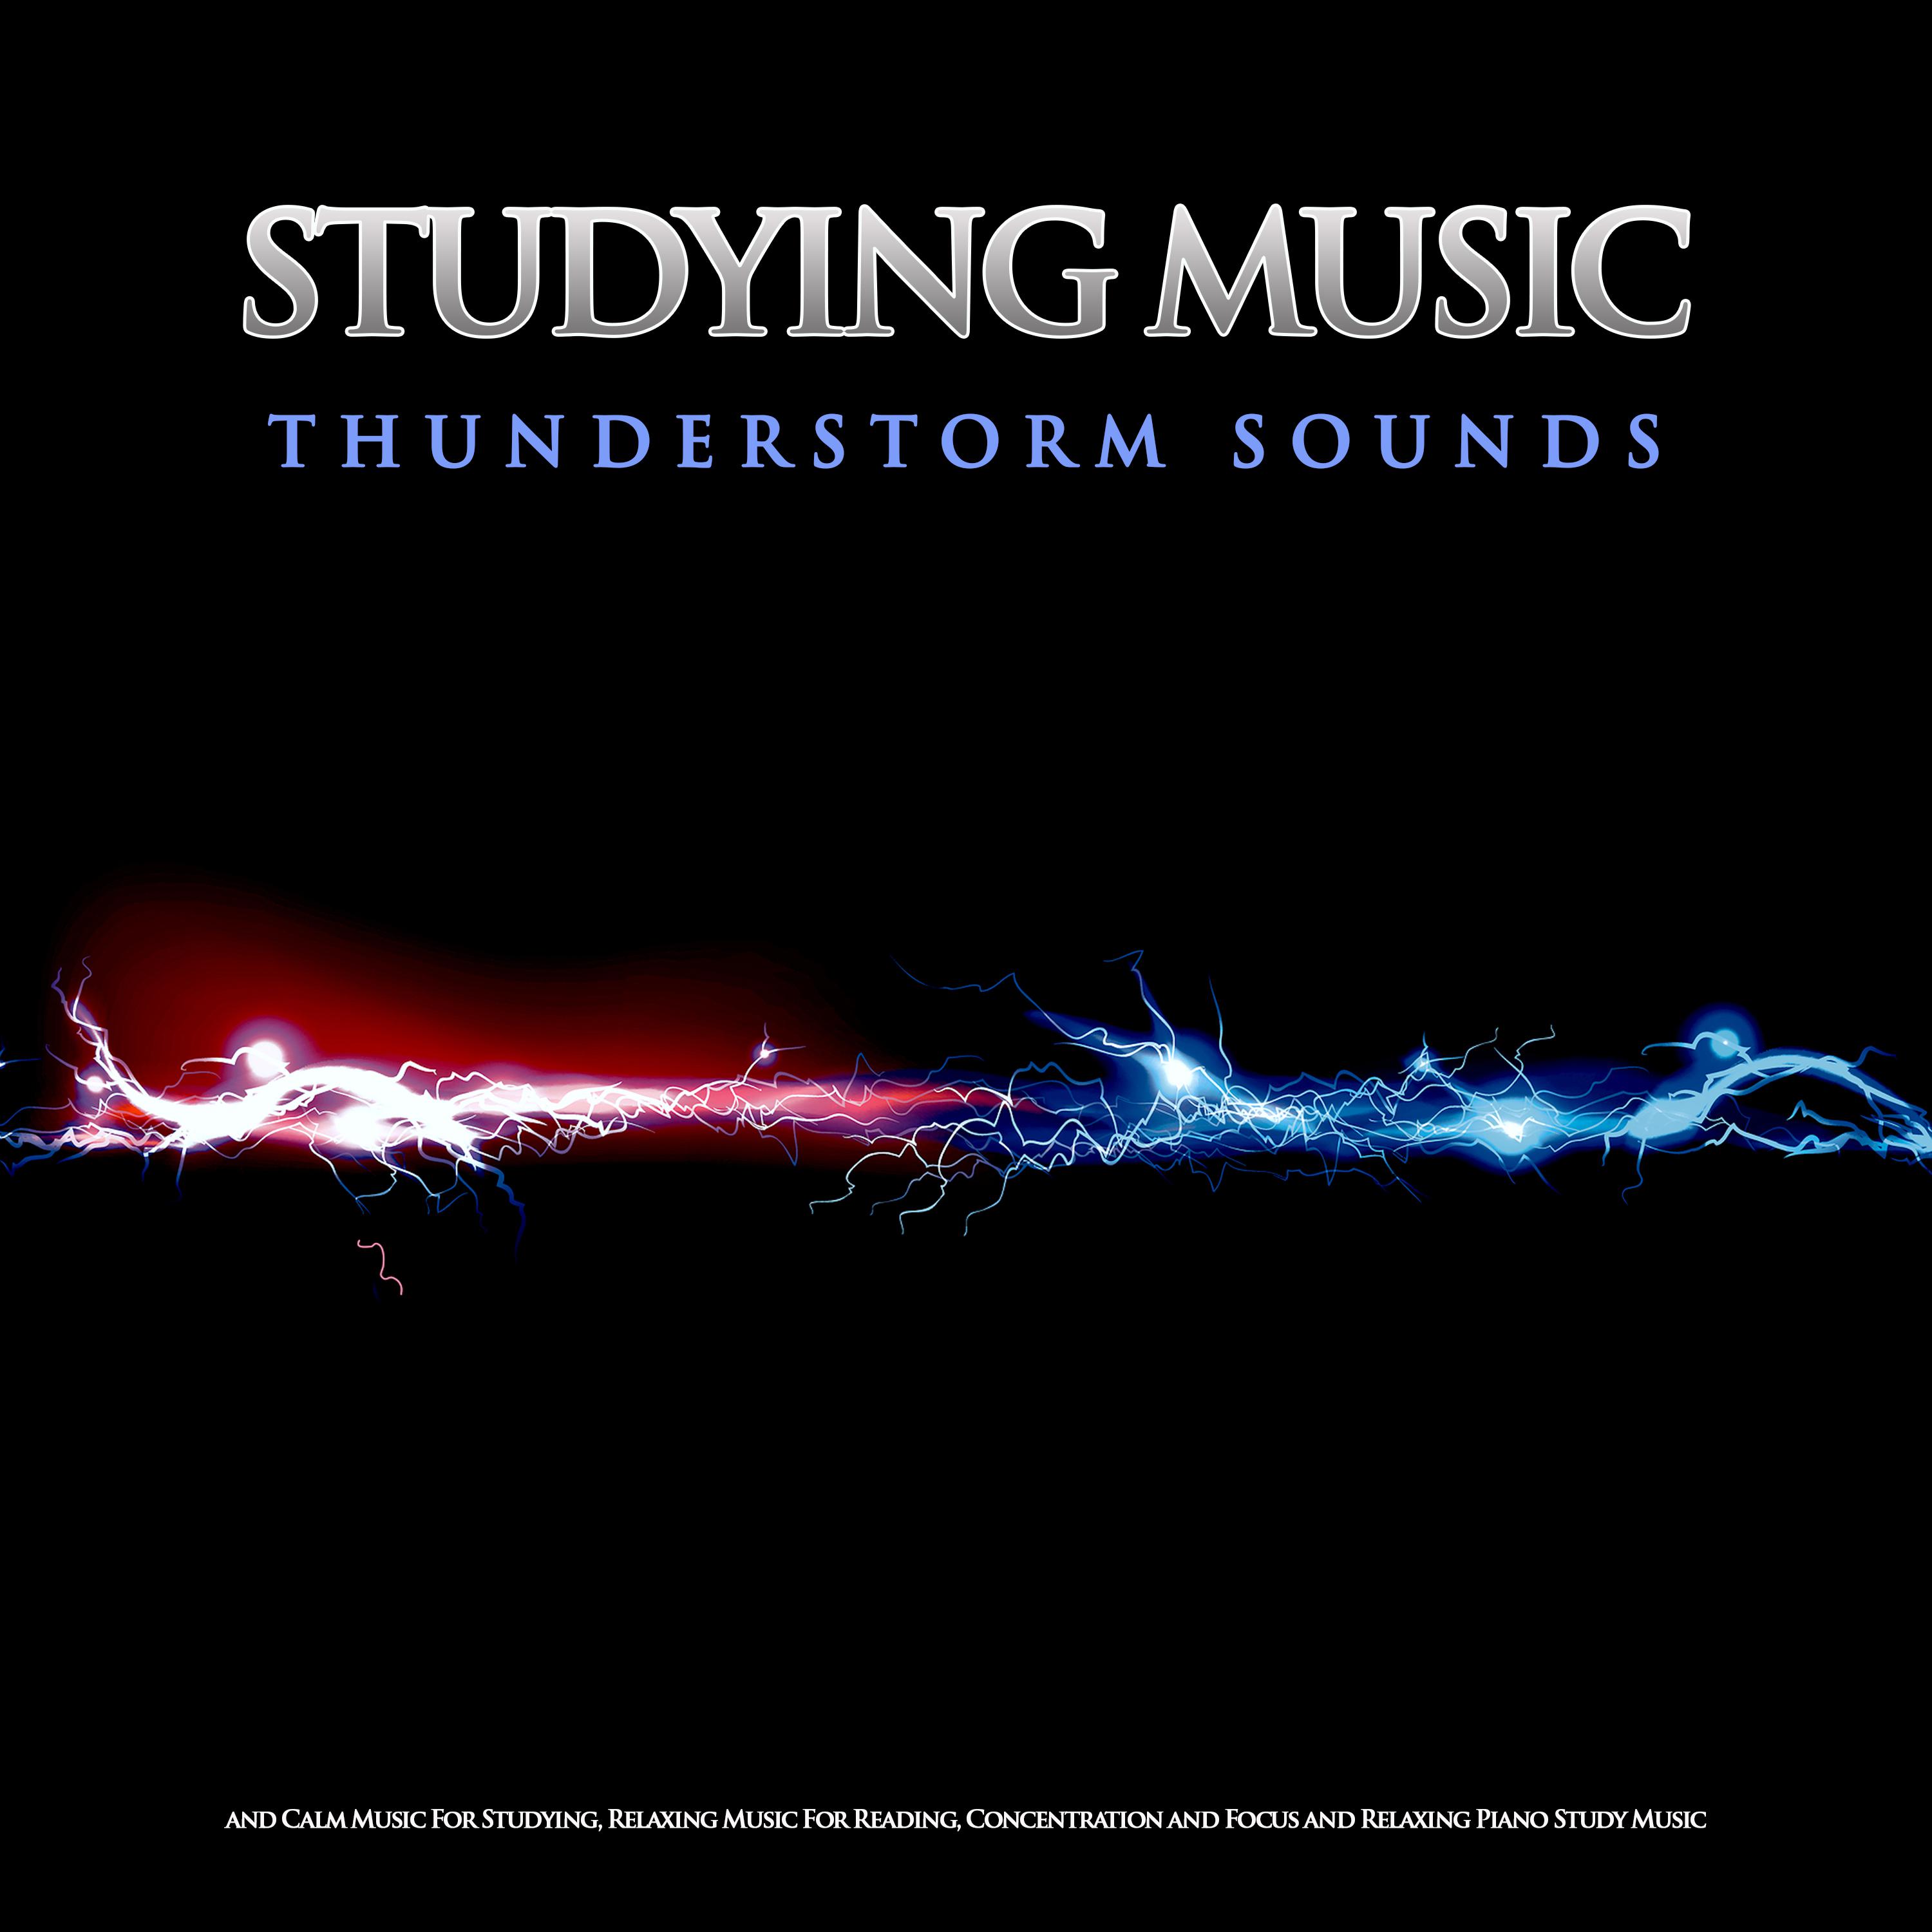 Sounds of a Thunderstorm Study Music